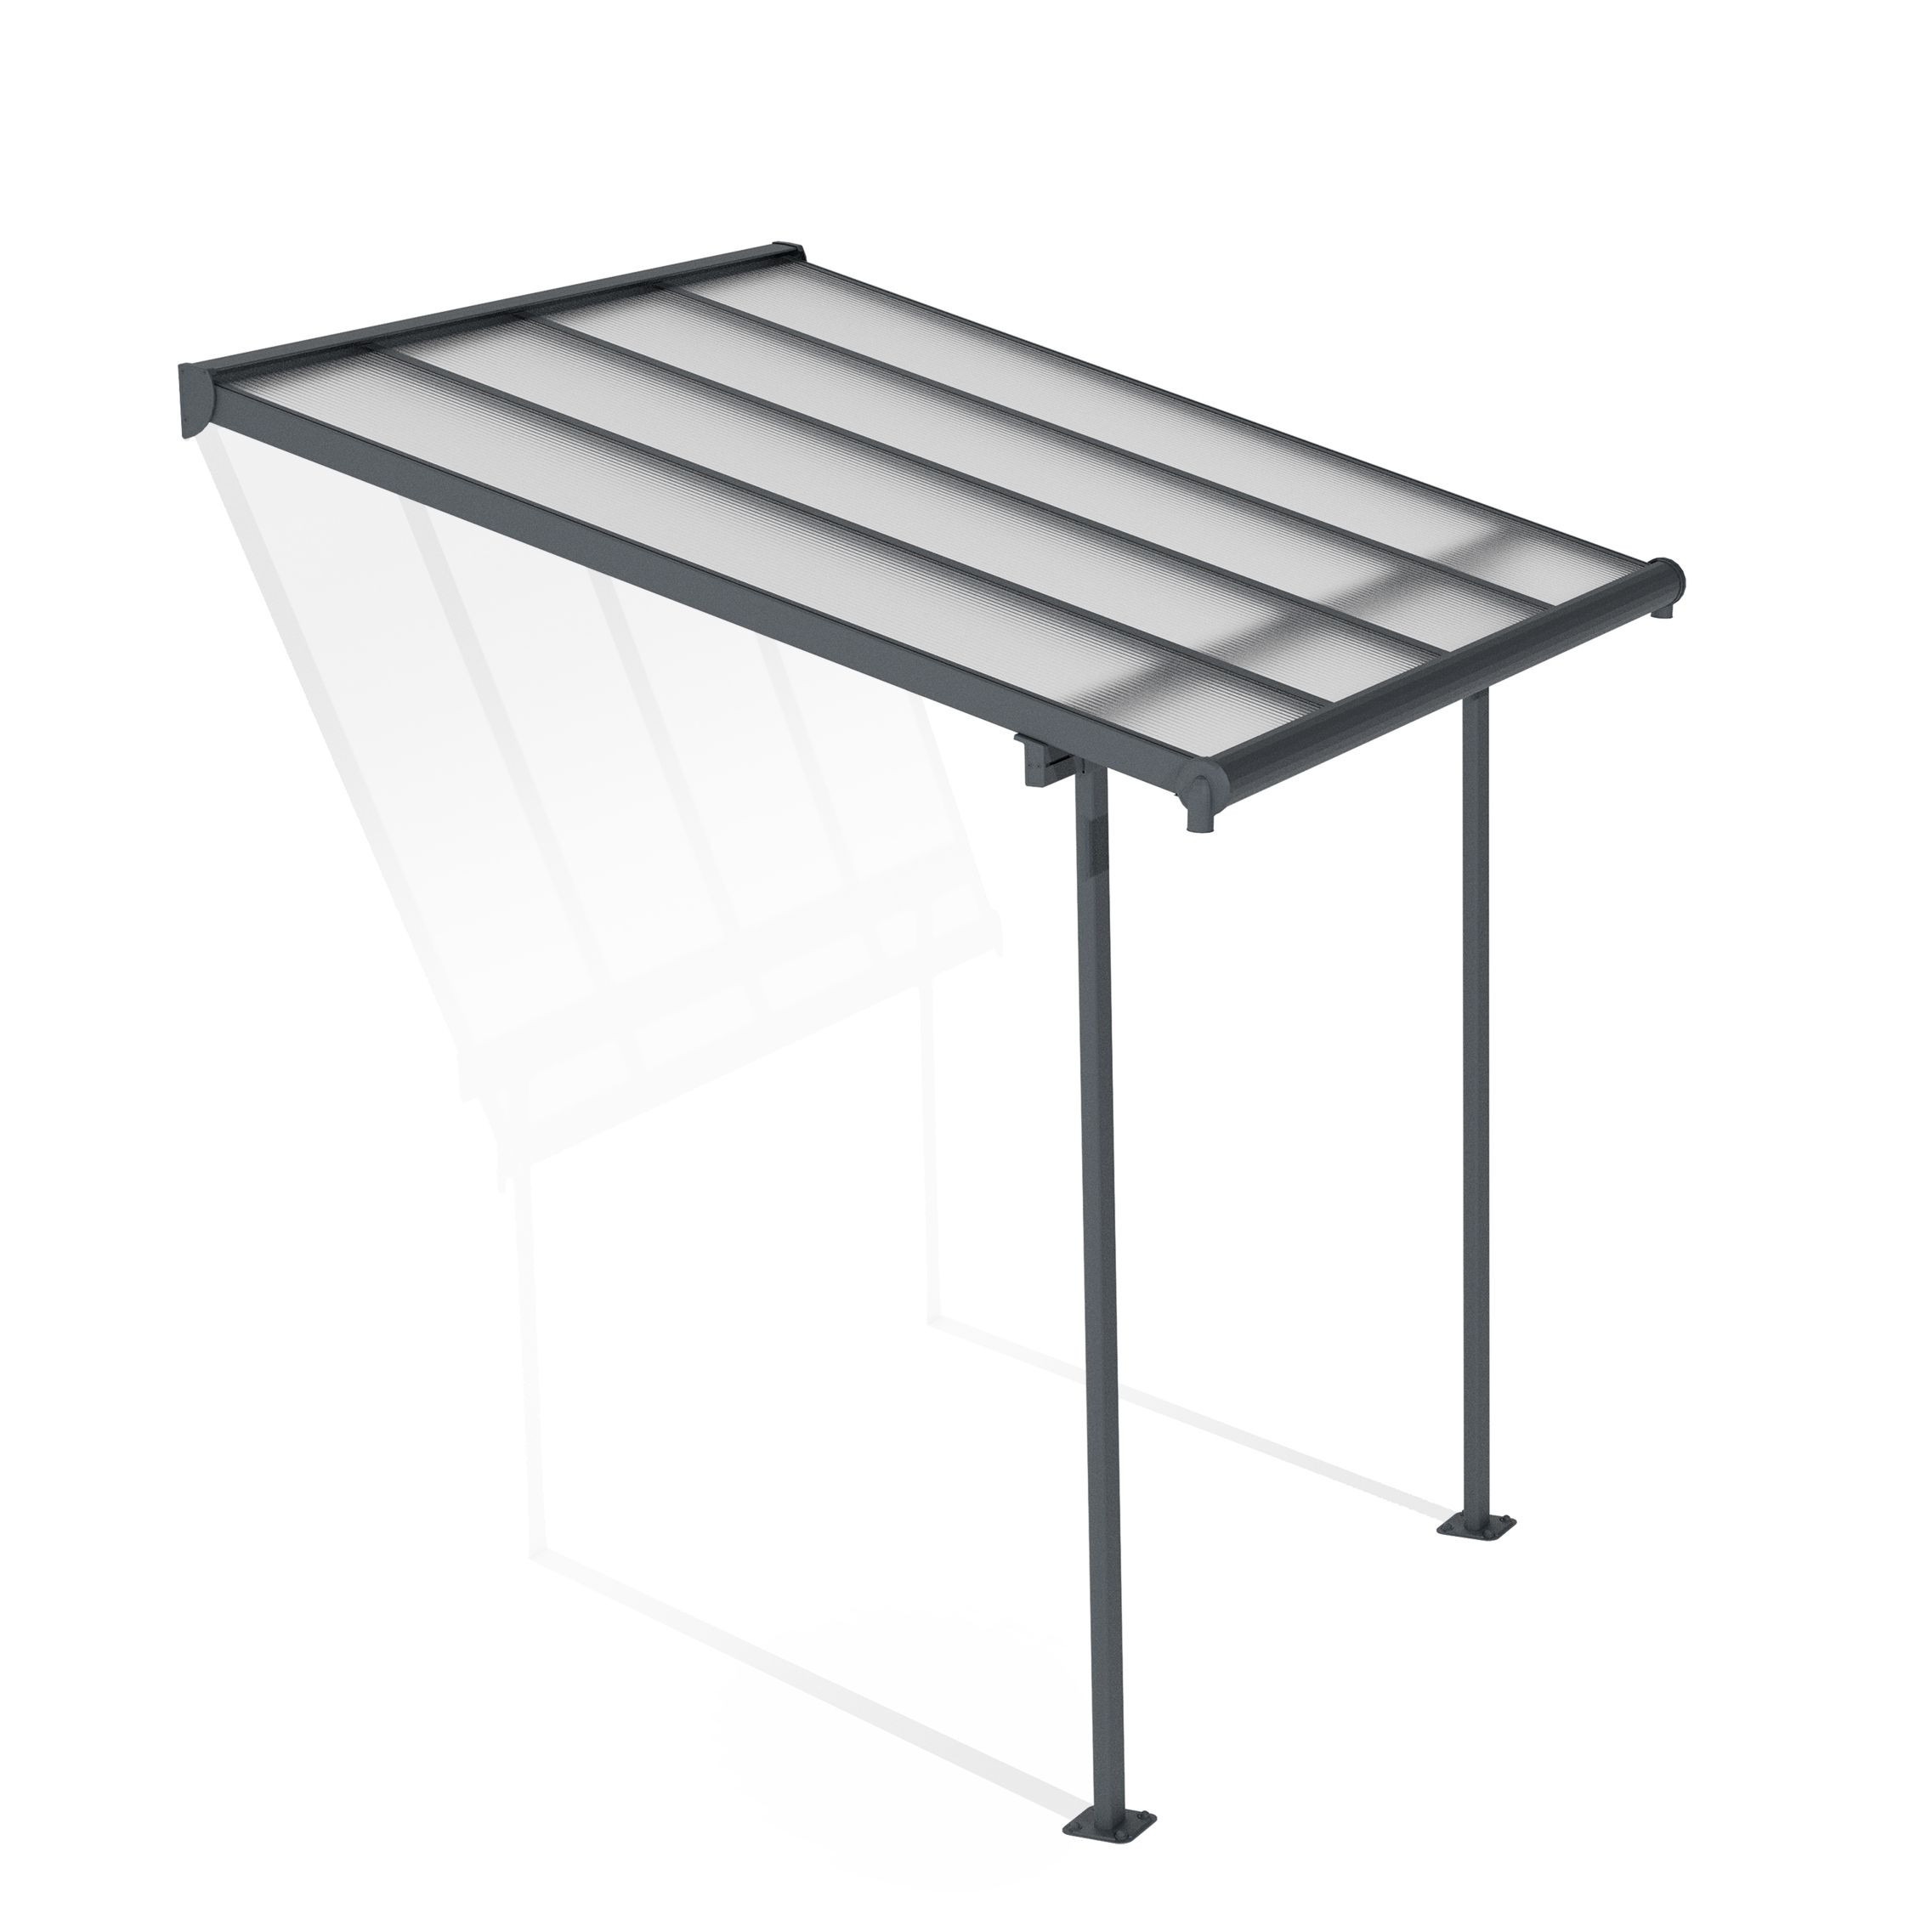 Palram - Canopia Grey Patio cover (H)3000mm (W)2280mm (D)2245mm